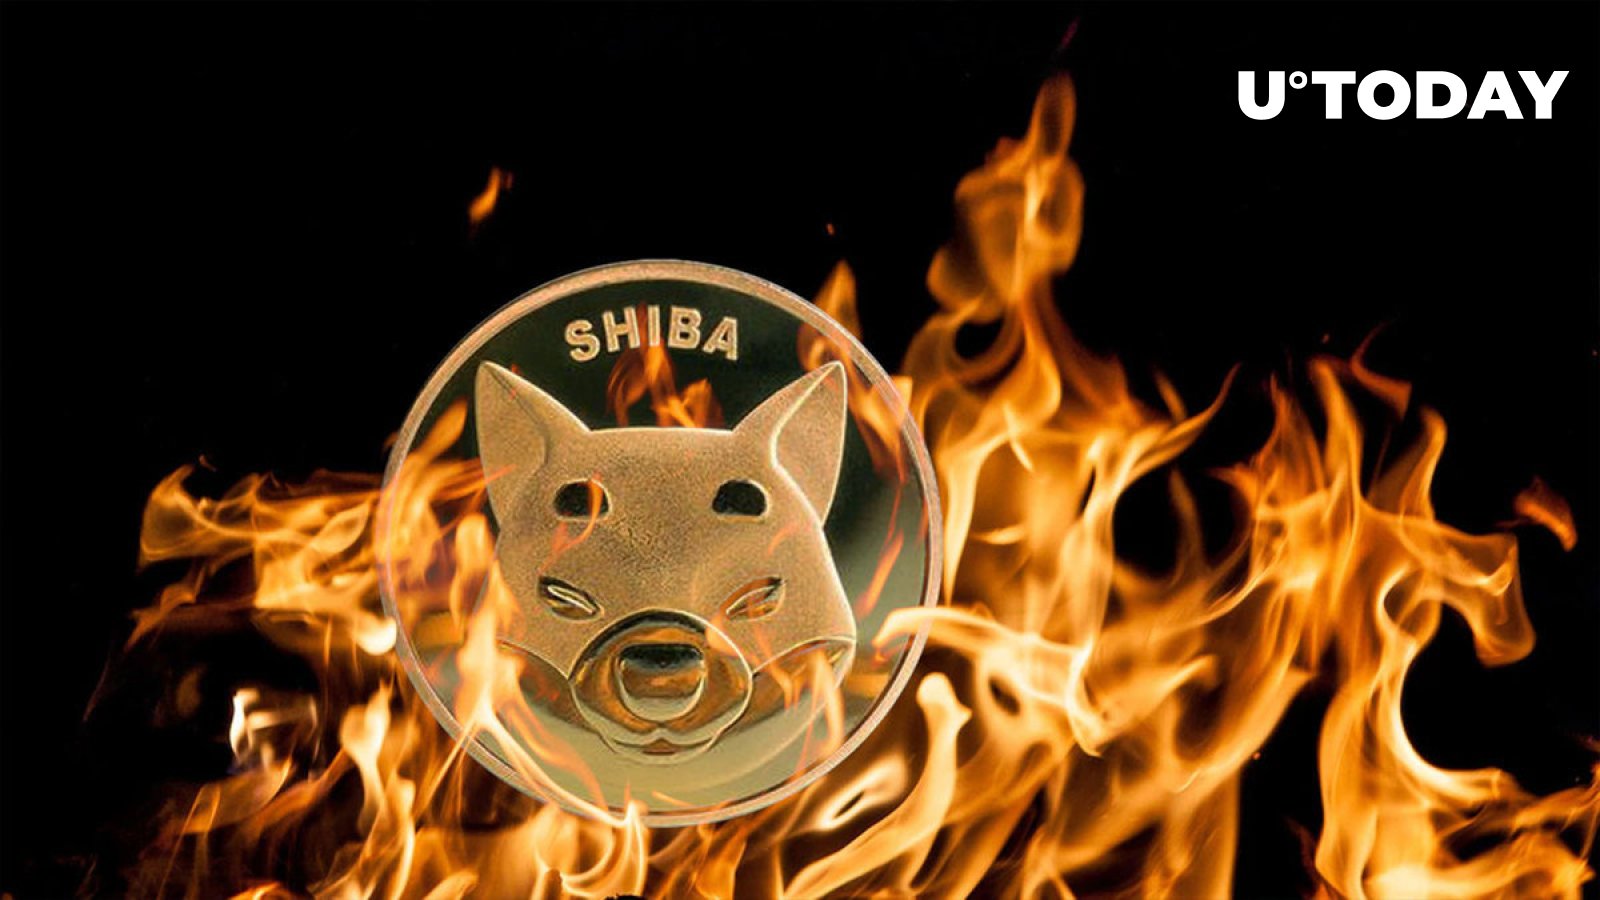 SHIB Army Slammed for Making Too Small Burns: ‘It Will Take More Years and Nothing Will Change’